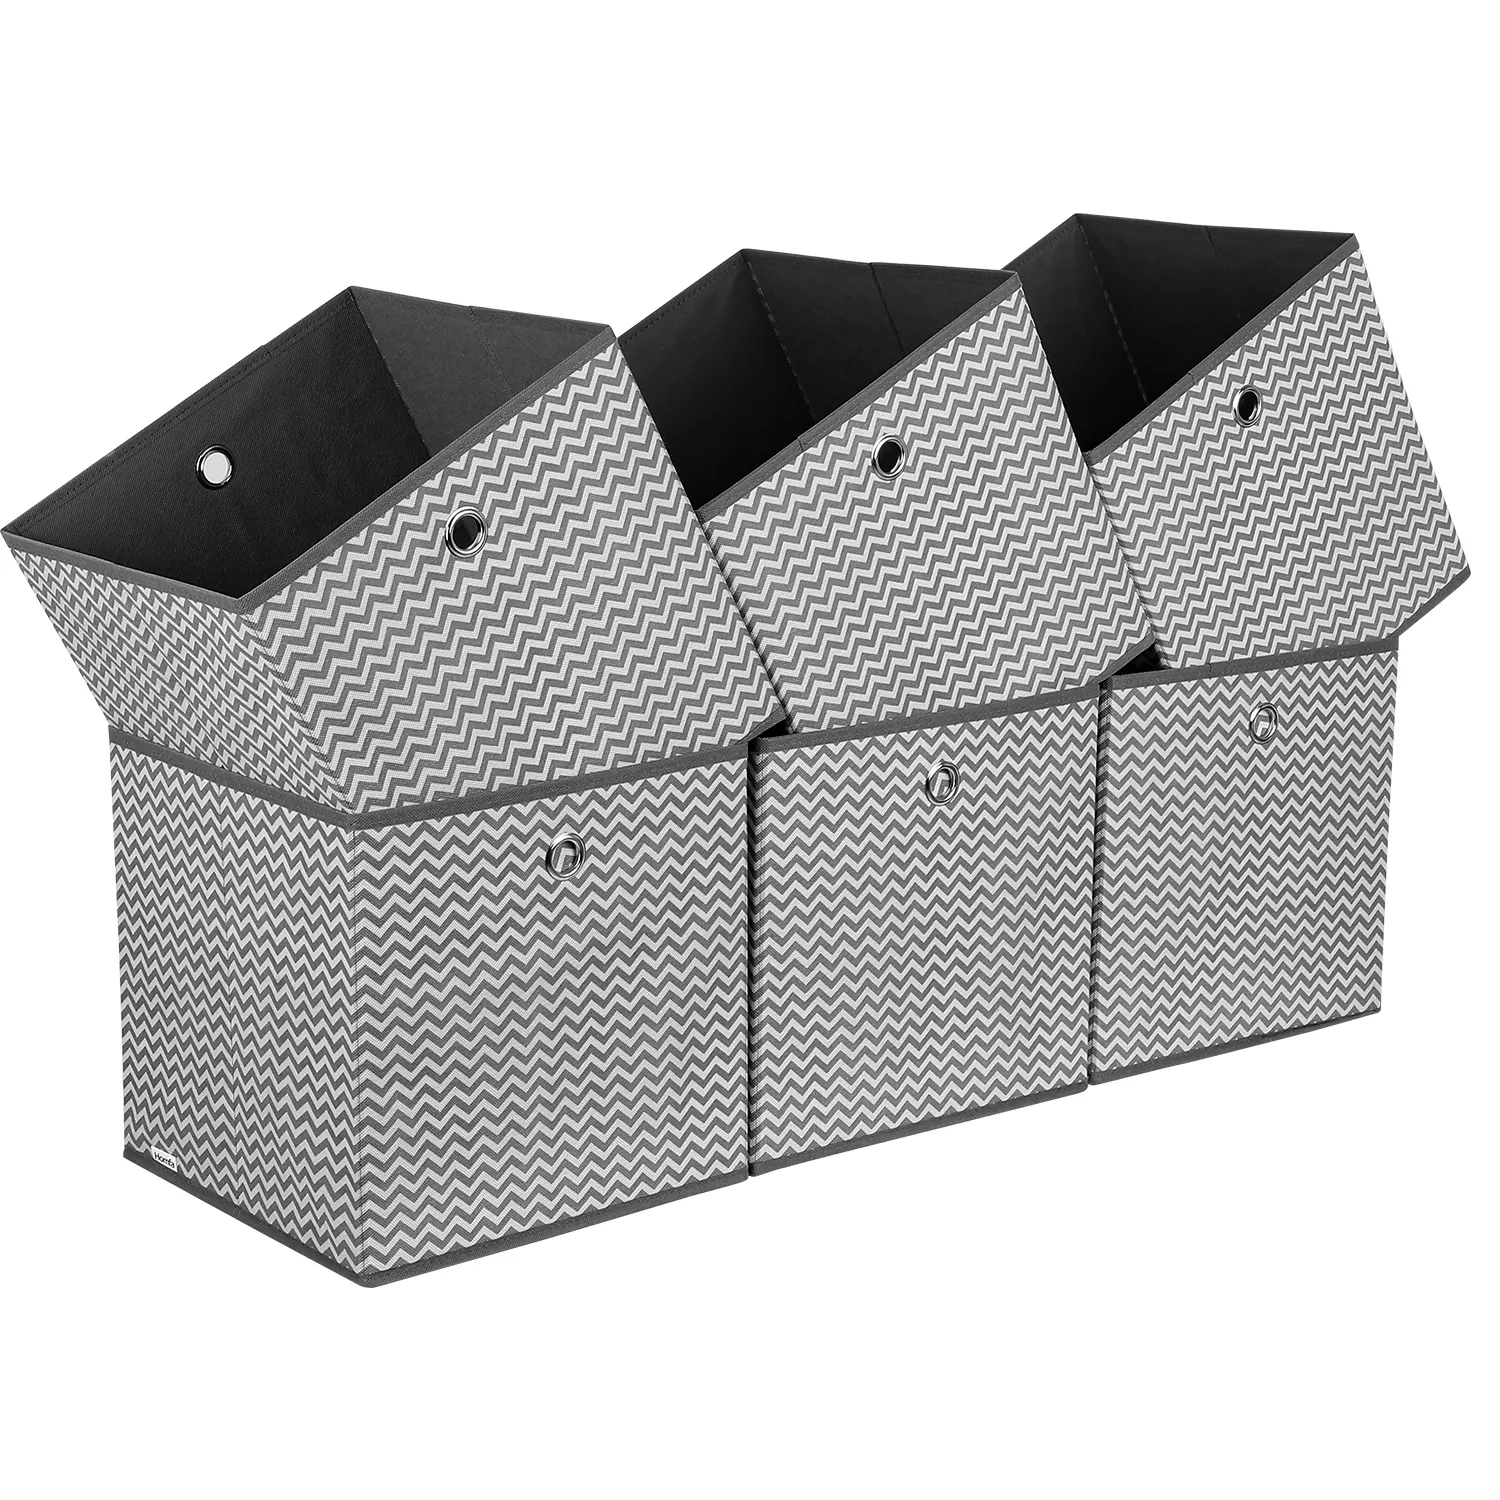 Foldable Storage Cubes Fabric Bins Washable Cloth Box Drawers Collapsible Organizer for Toys Bedroom Shelf Black Set of 6 30x30x30cm (Grey+W